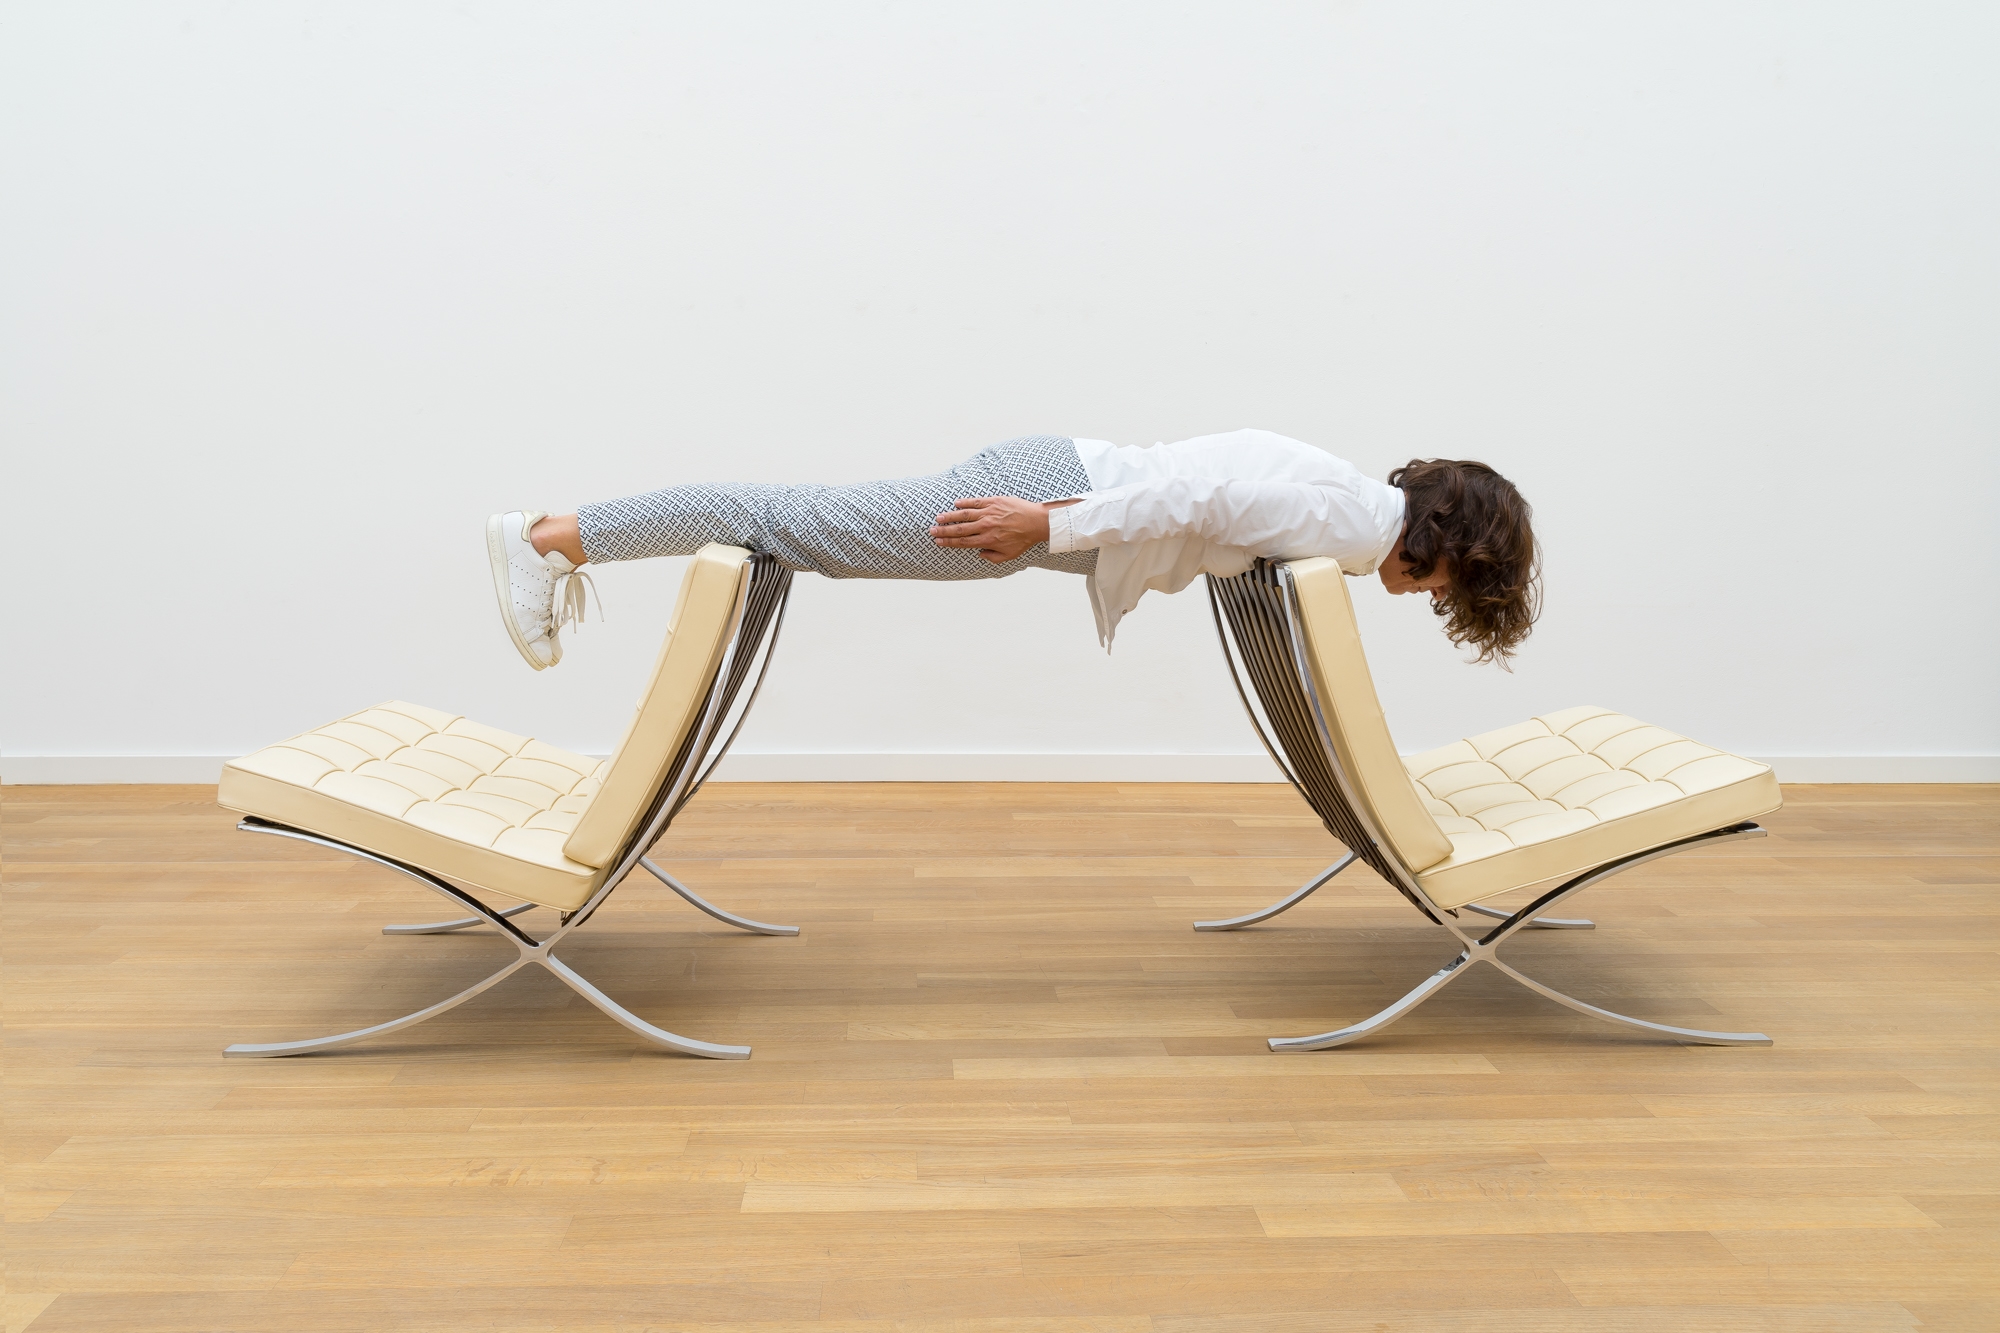 Artwork by Erwin Wurm, Sigmund Freud modern“ (One Minute Sculpture), Made of Installation with instructions in ink, metal, leather cushions (Barcelona-Chair)